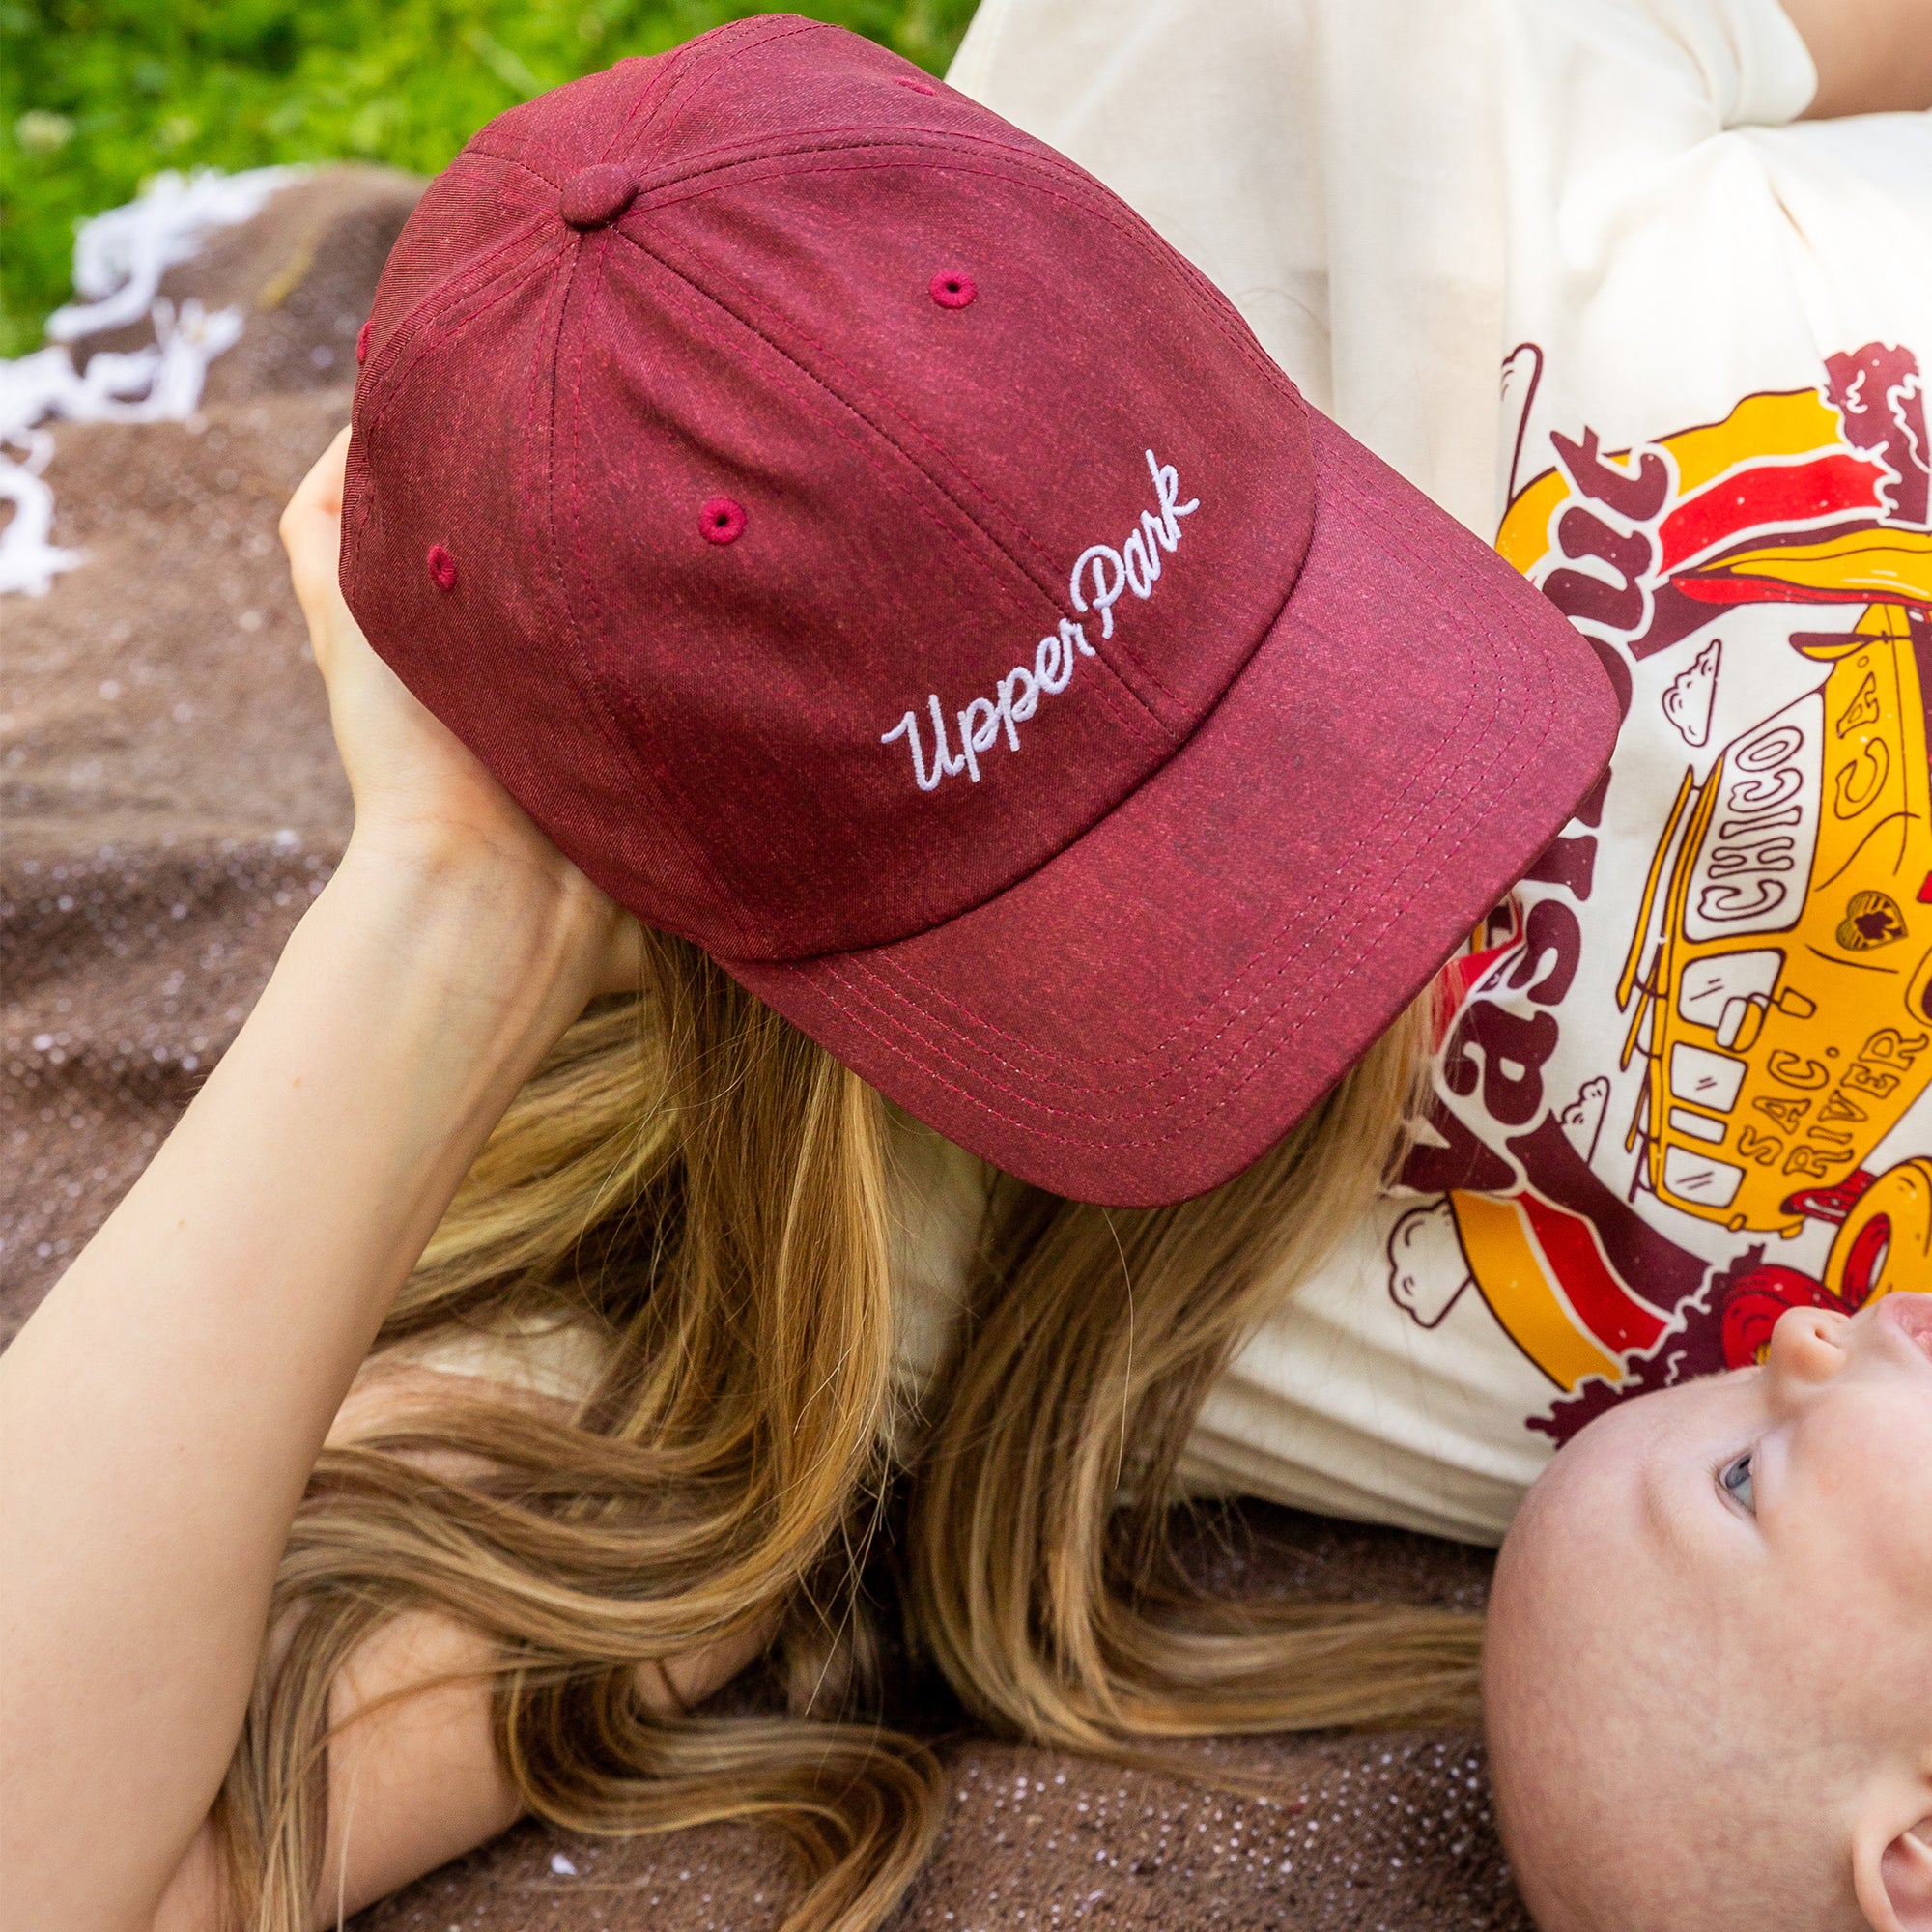 Mother and son laying on a Upper Park Clothing blanket wearing a performance hat while looking down at her son